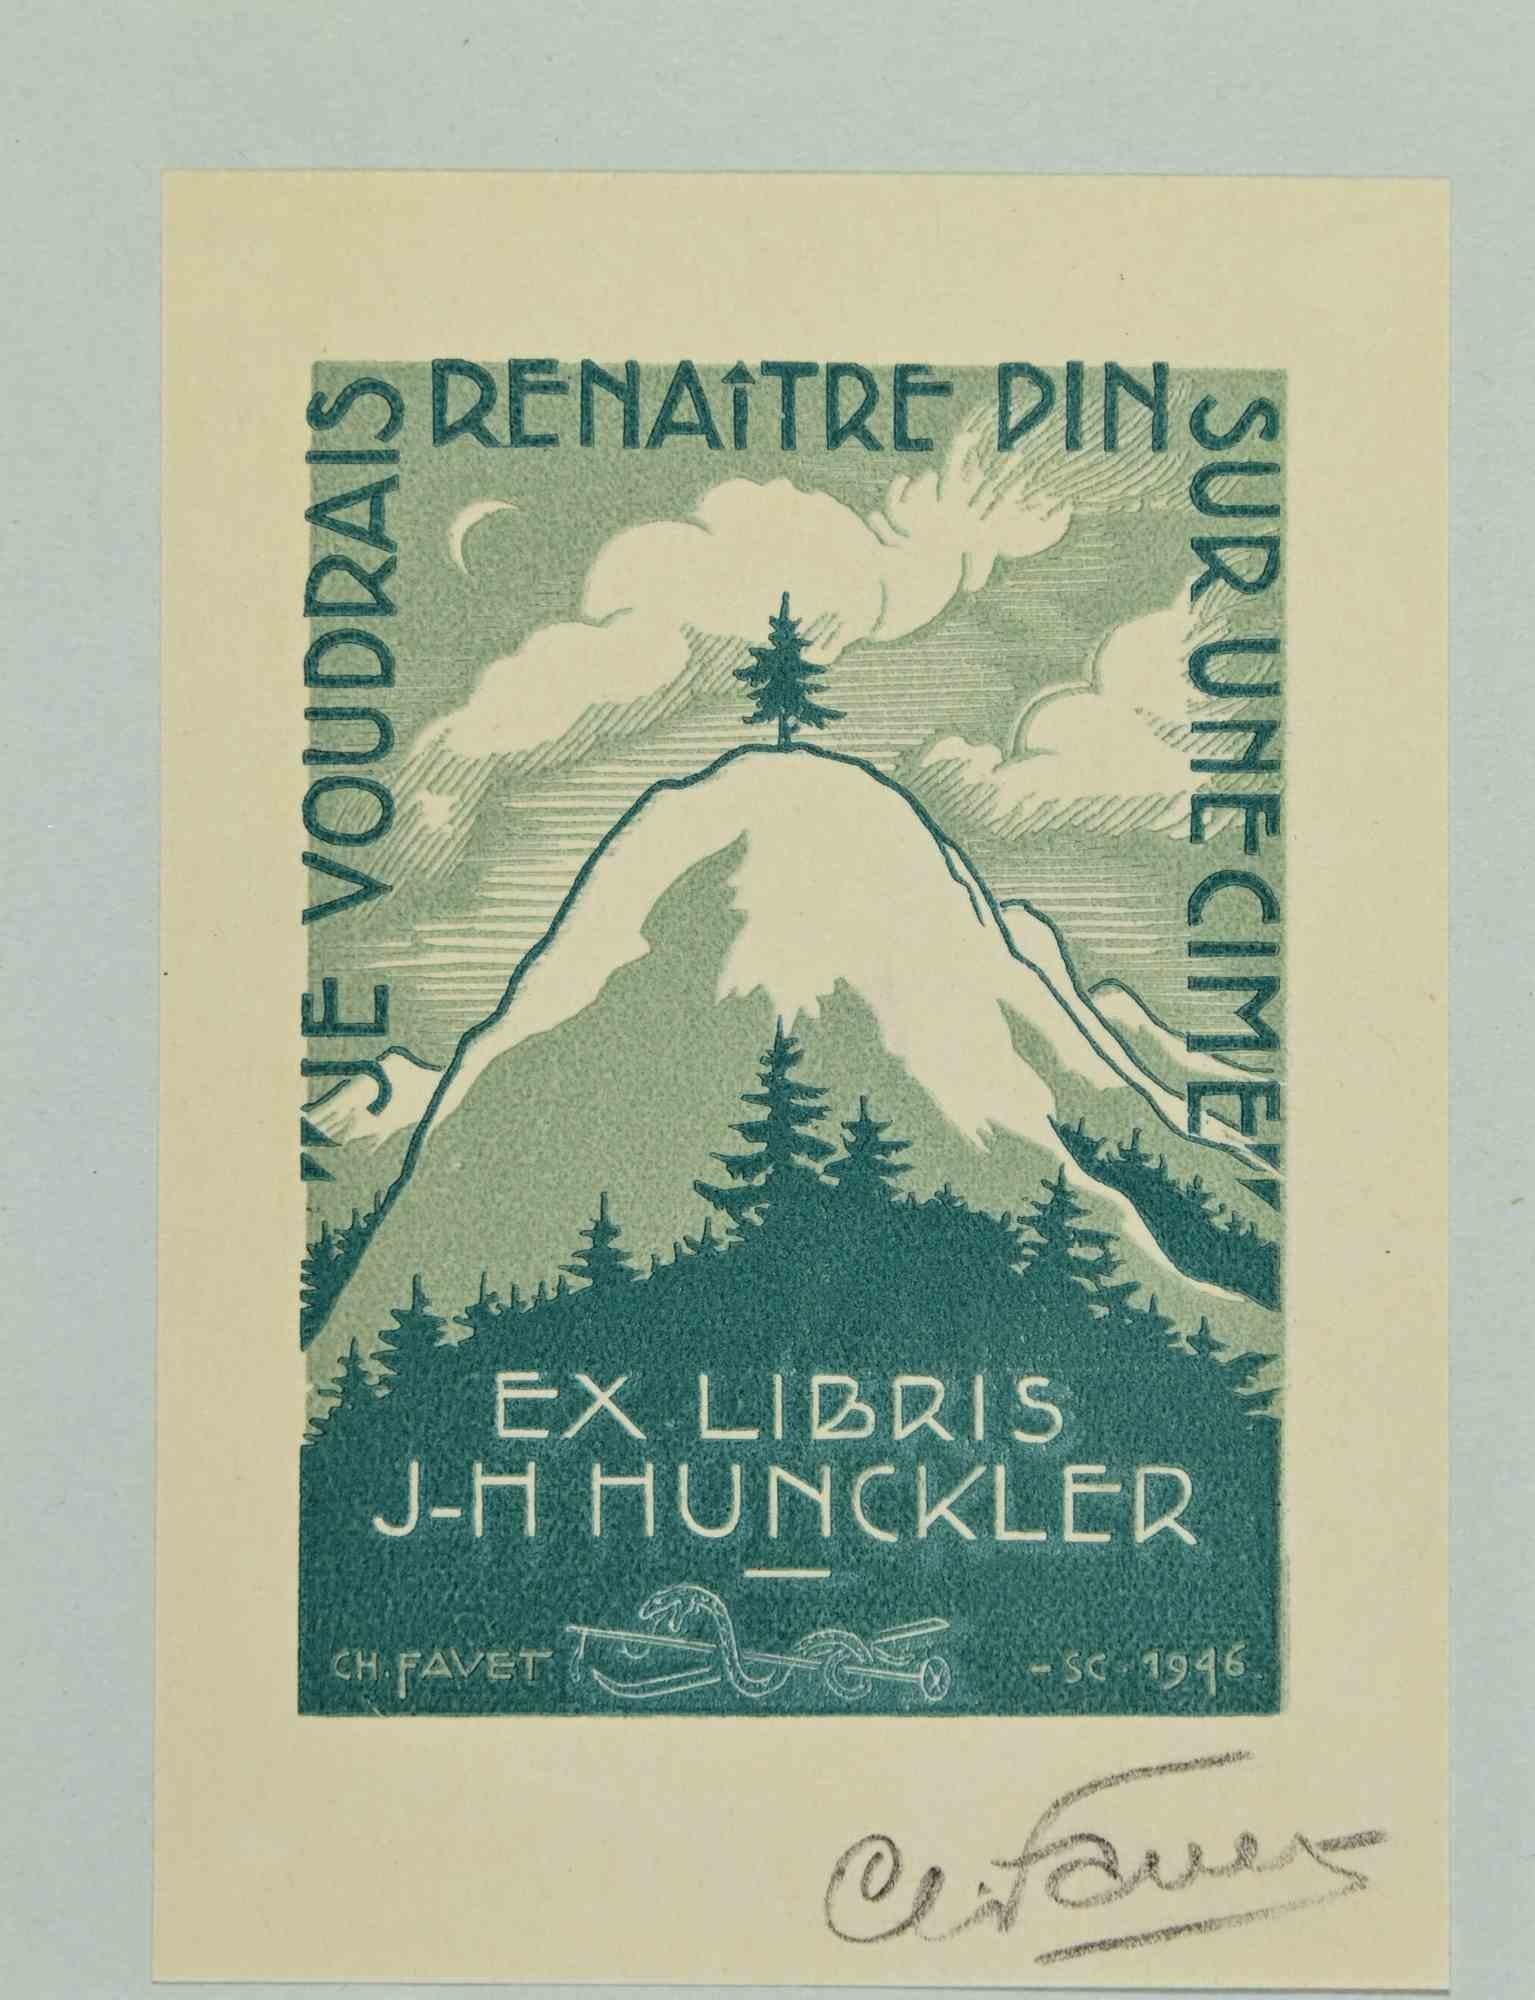 Ex Libris - J-H  Hunckler is an Artwork realized in 1946, by the French Artist Charles Favet (1899-1982). 

Woodcut print on ivory paper. Hand Signed on the right margin.

The work is glued on colored cardboard.

Total dimensions: 12x10 cm.

Good